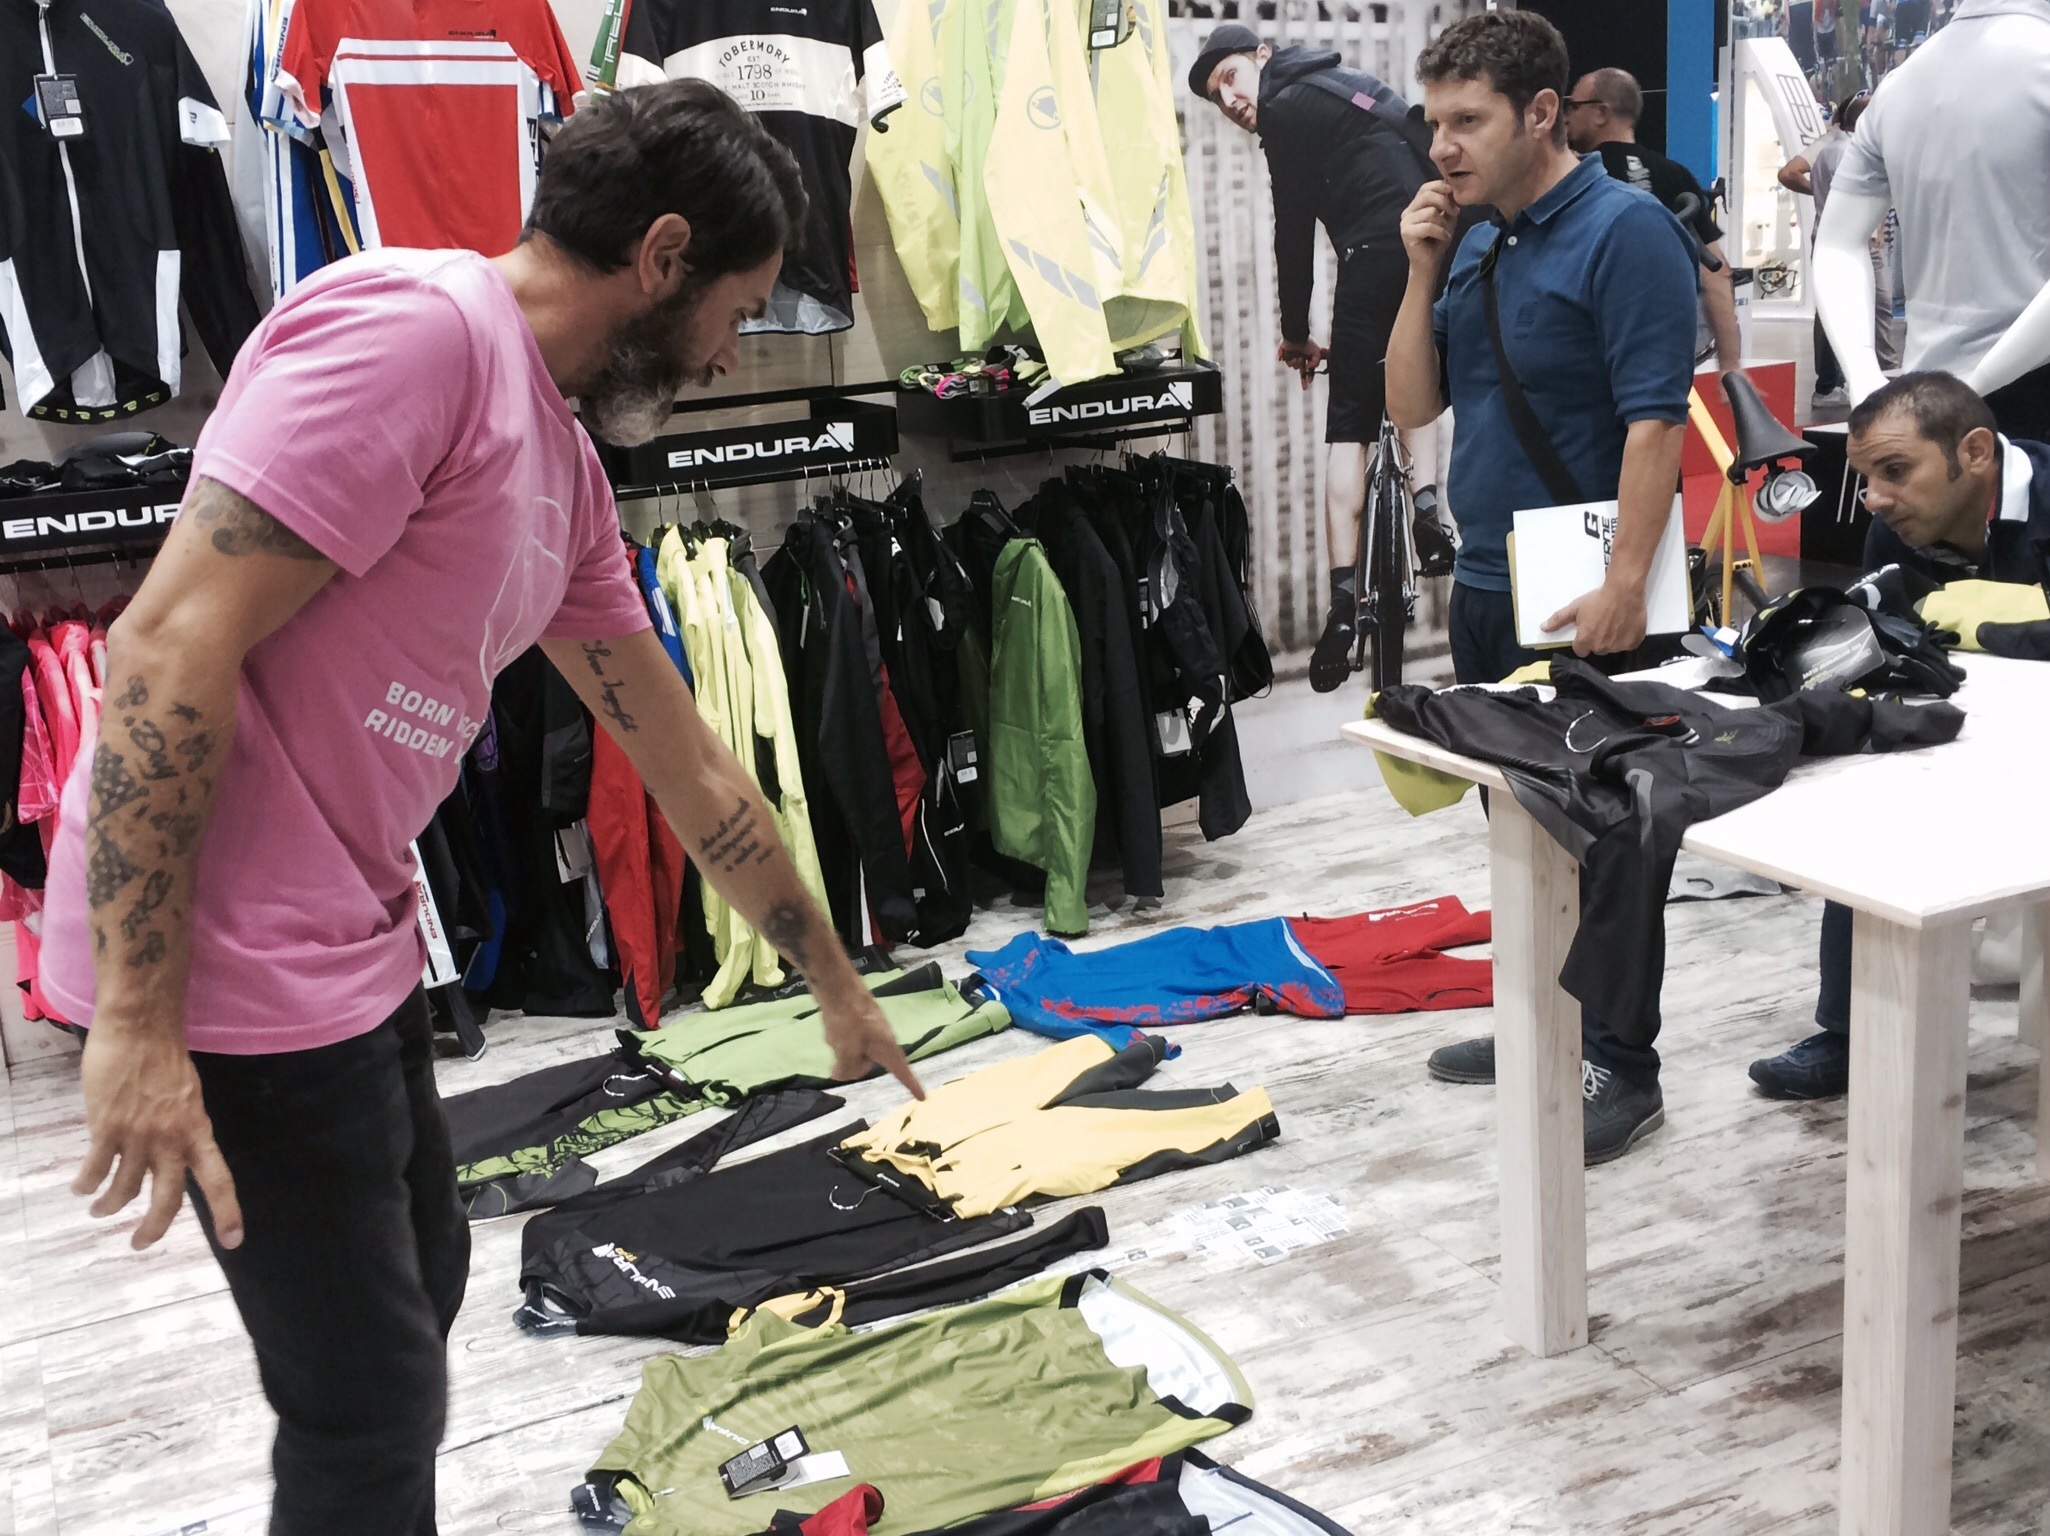 Business is done, too. Here an Endura sales rep shows the line to an Italian retailer.